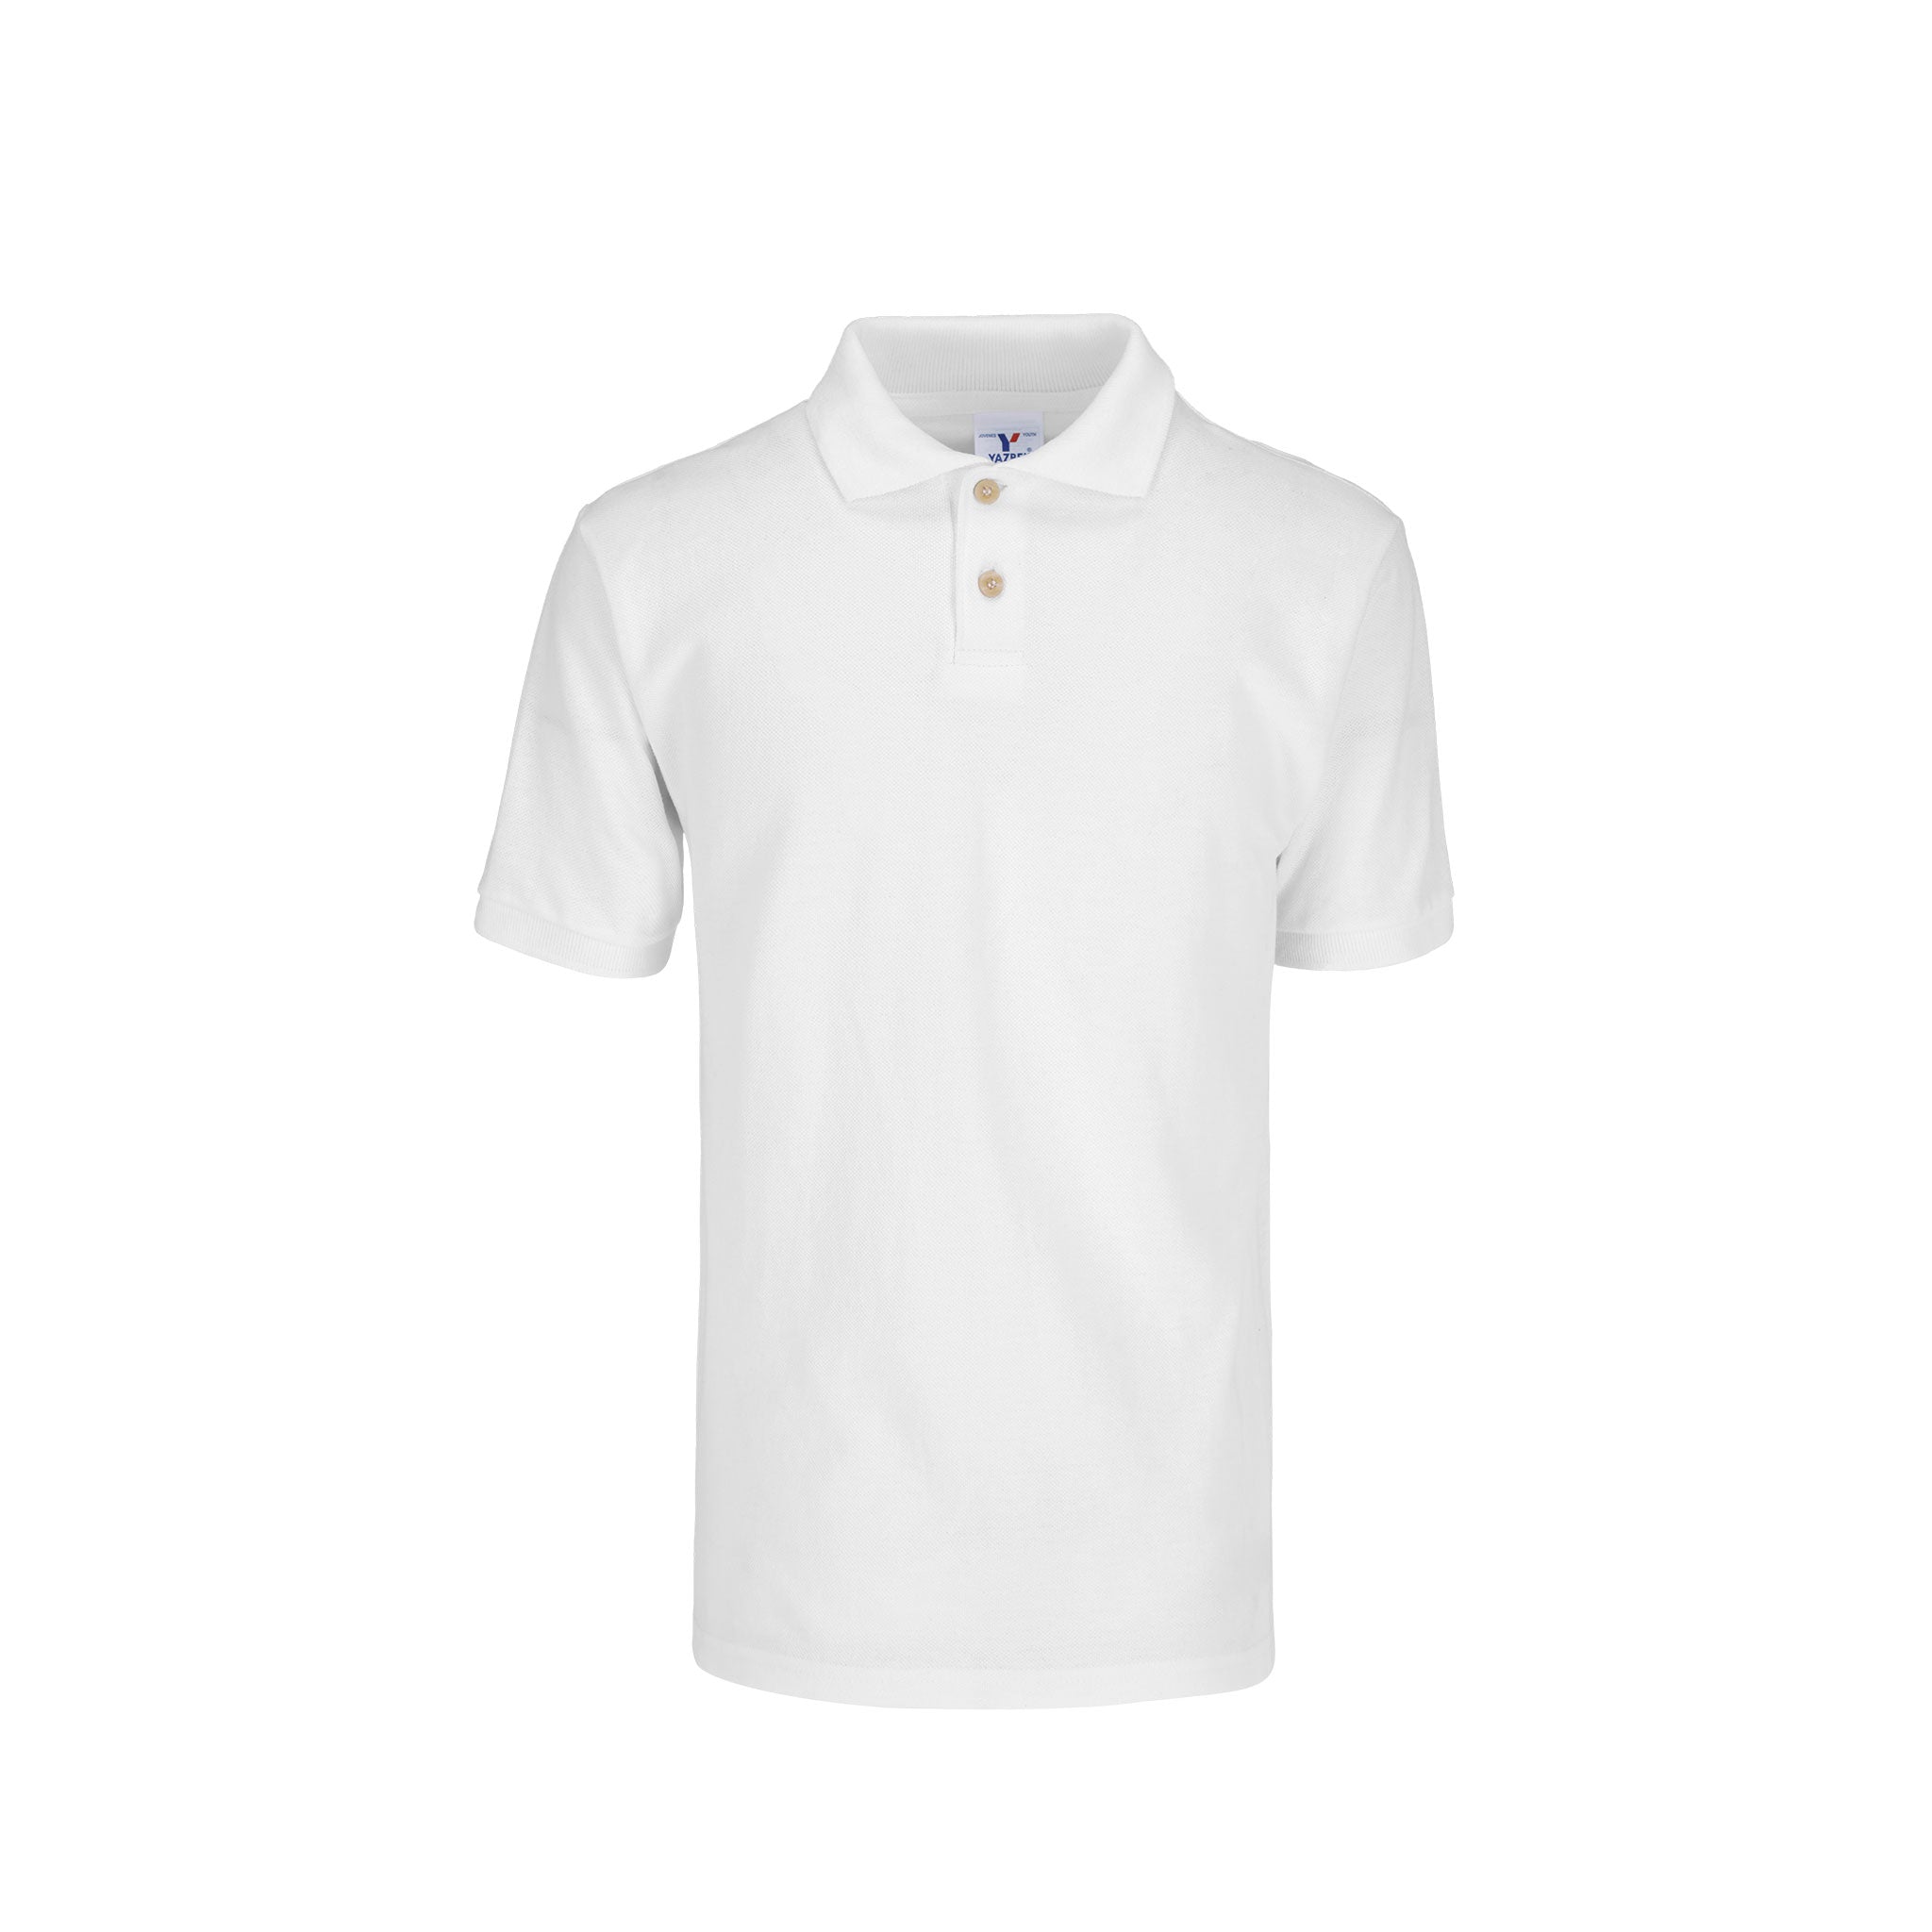 Sustainable Polo Shirt Made in Brooklyn NY USA White / S